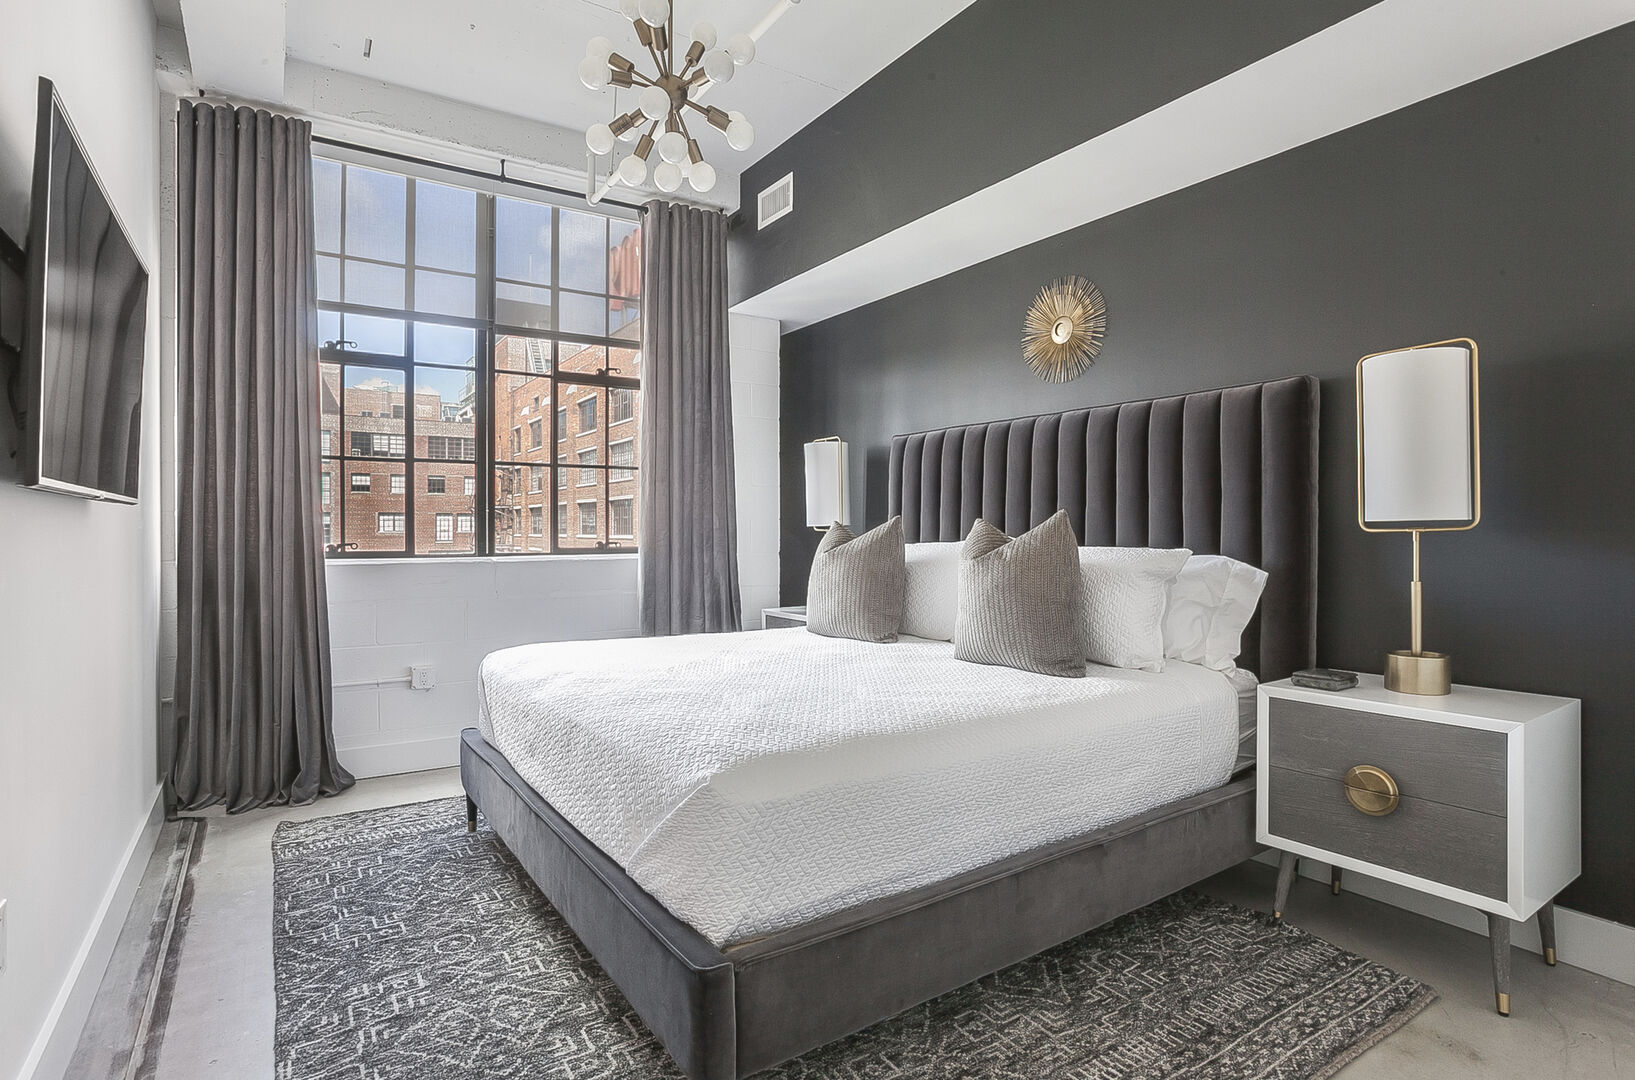 Bedroom of this Ponce Market Apartment with a large bed and twin nightstands.